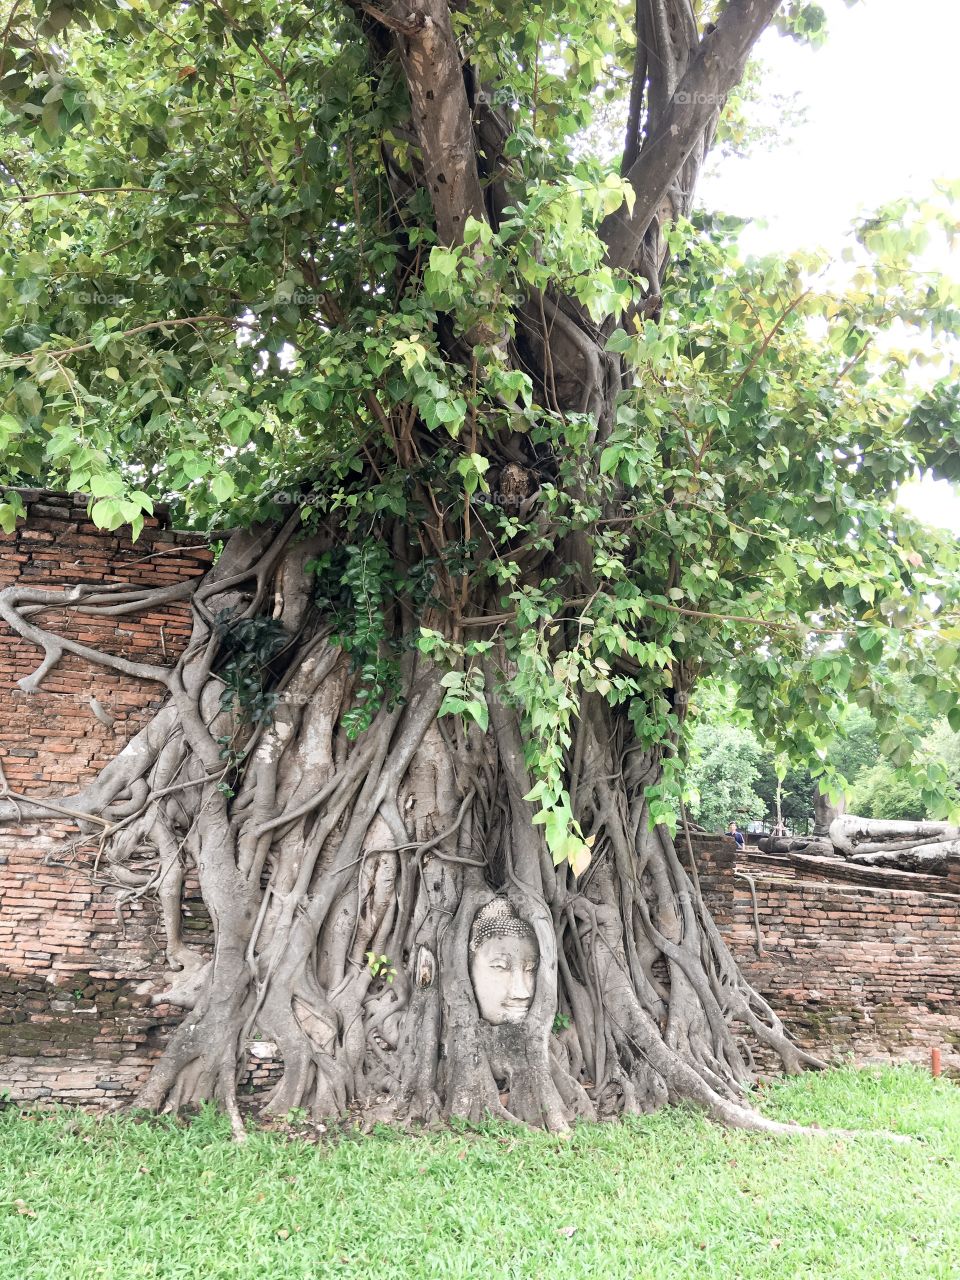 Ayutthaya,thailand - June 08 2019: An interesting point for tourists is the head of the Buddha statue at the root of the pipal tree. It is assumed that the storm was blown to the growing tree spot.